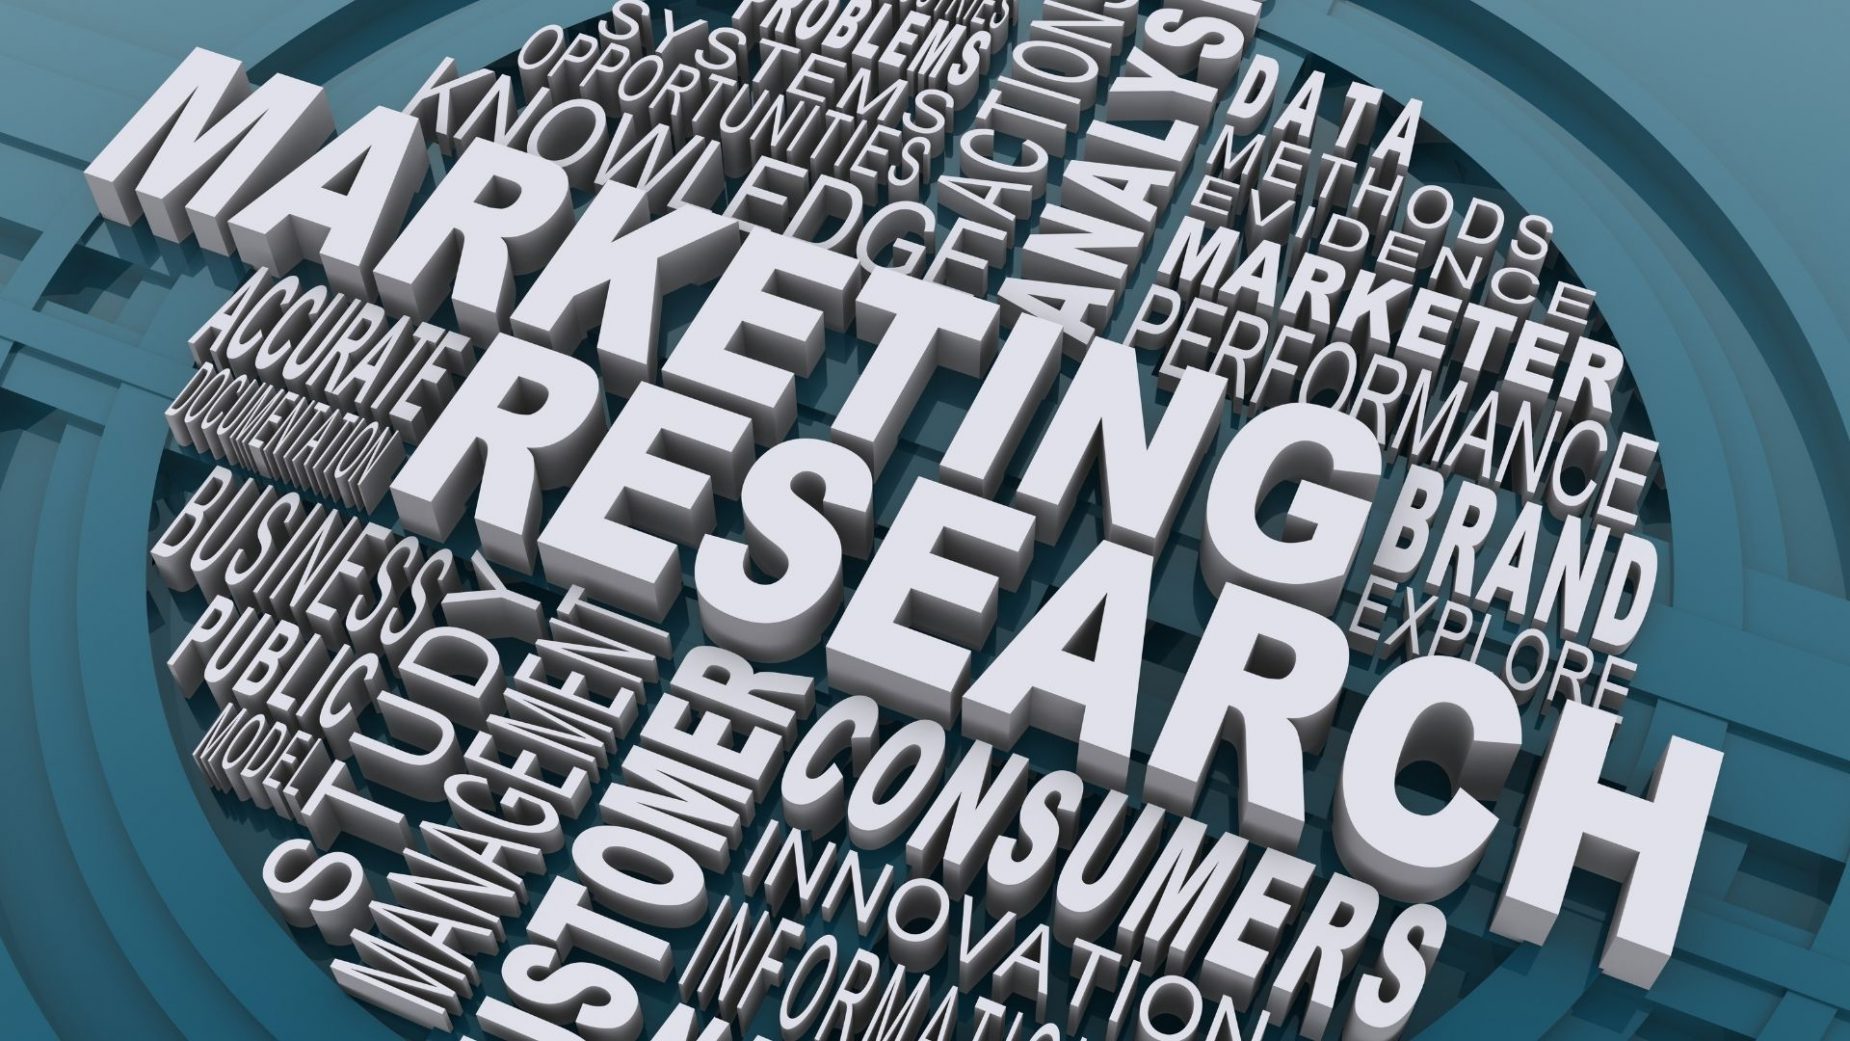 Marketing Research And Analysis Services Market